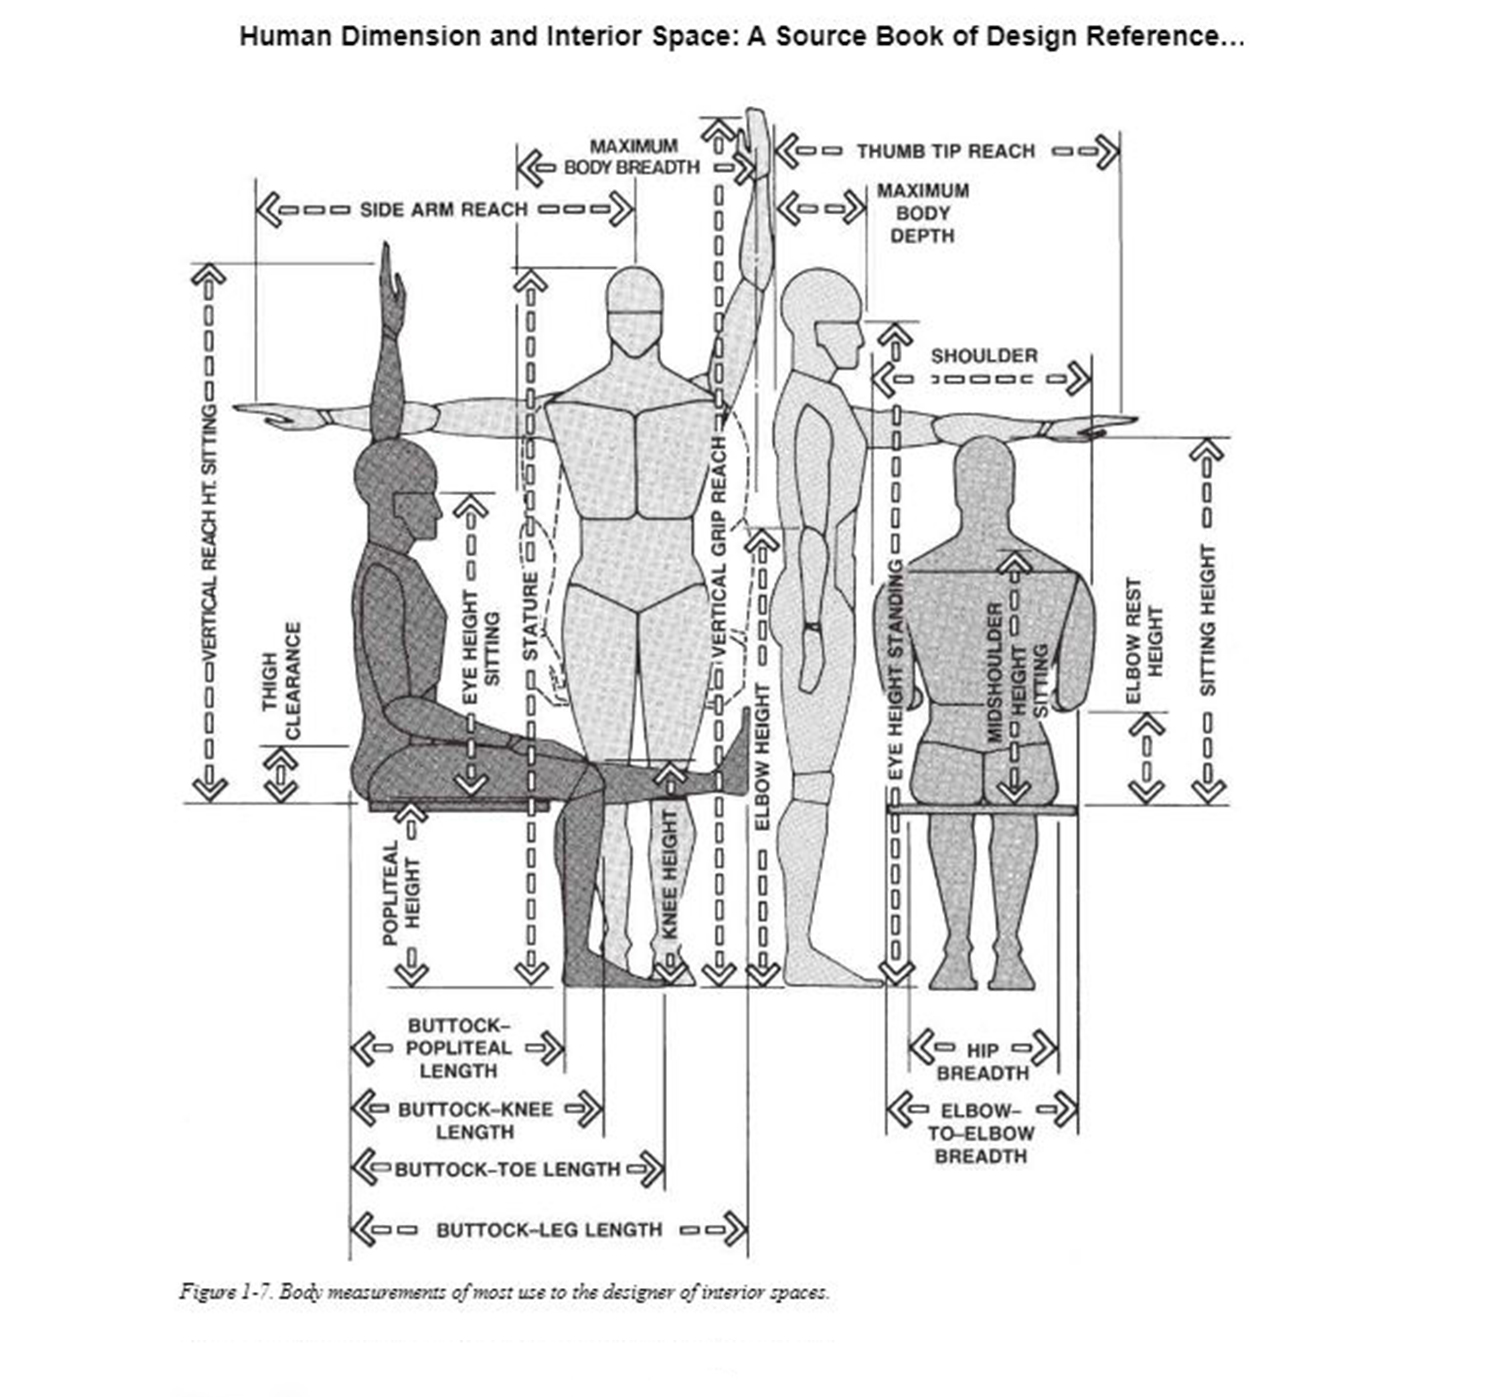 A photo of the inside of the book 'Human Dimension & Interior Space' showing the range of human movement